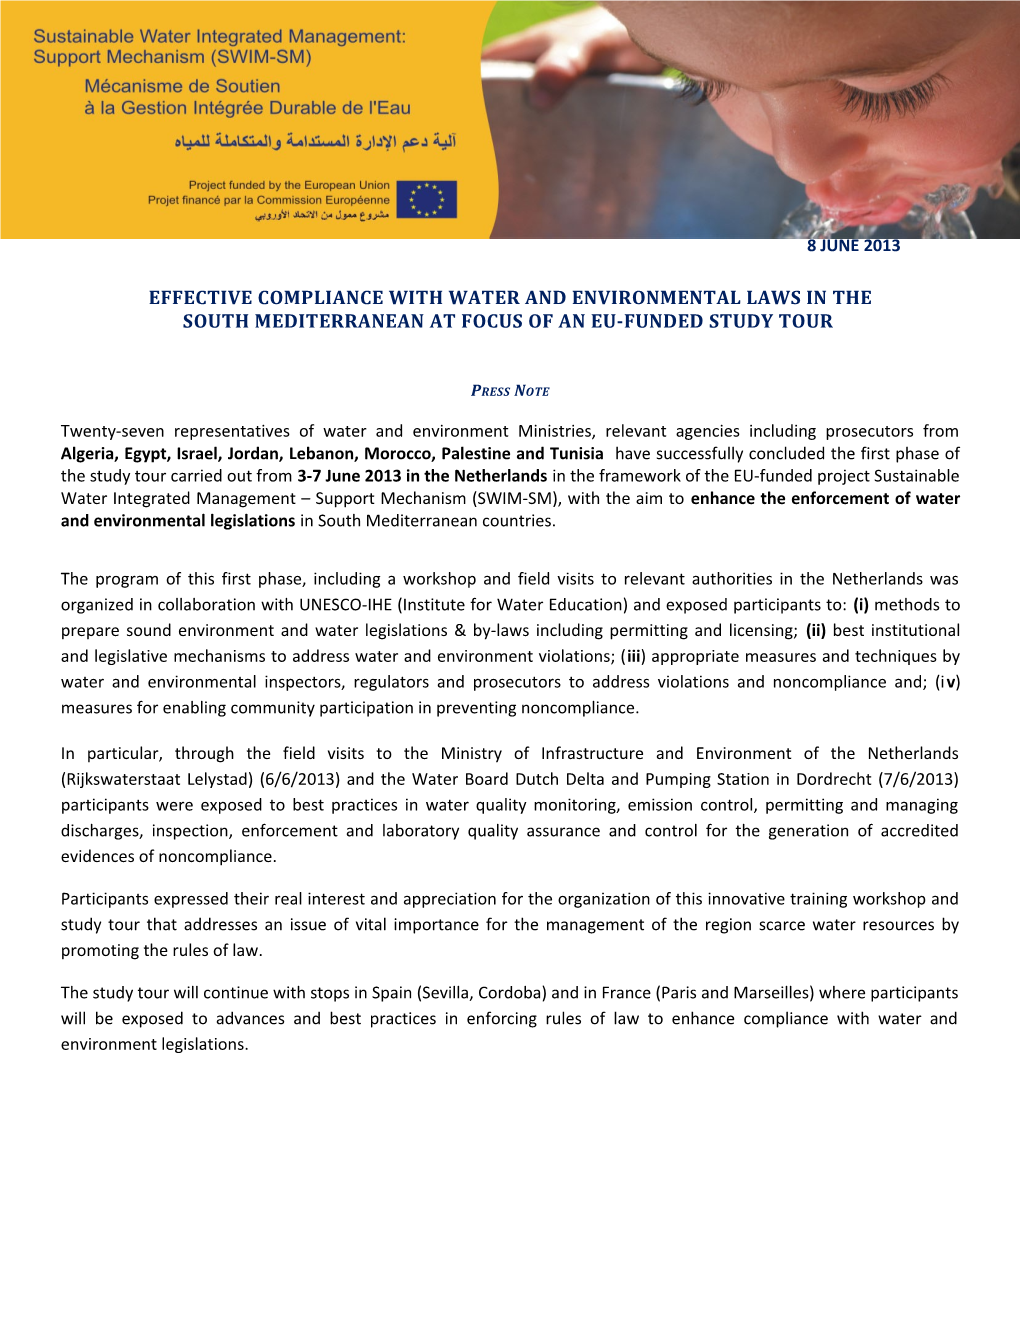 Effective Compliance with Water and Environmental Laws in the South Mediterranean at Focus